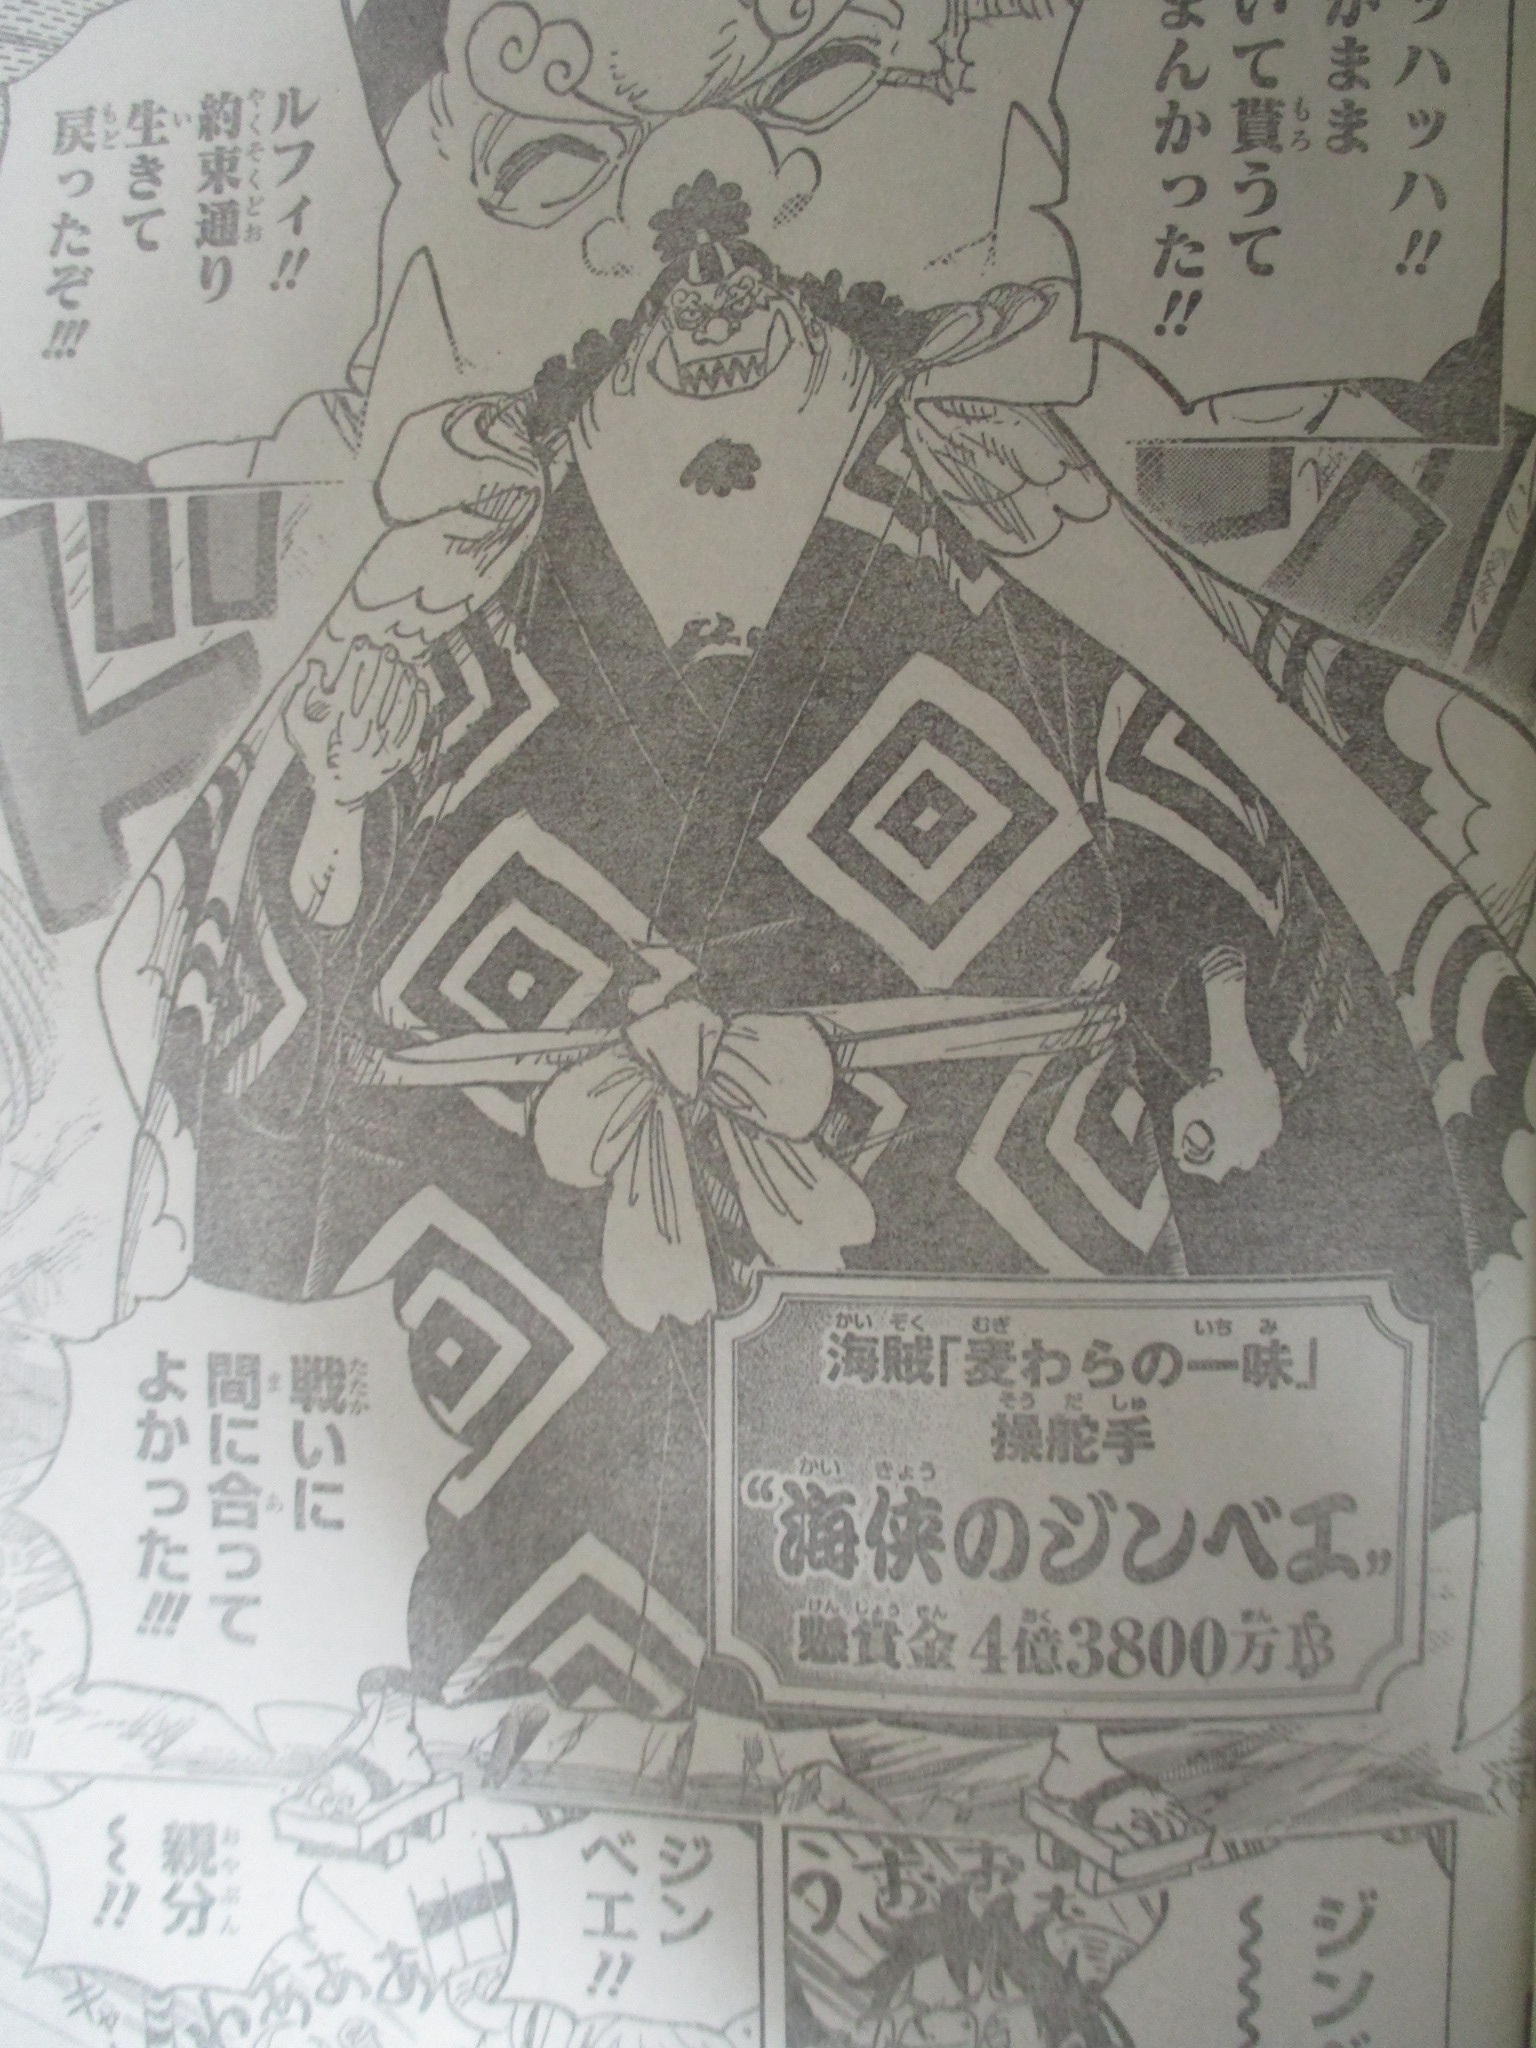 Spoiler One Piece Chapter 976 Spoilers Discussion Page 23 Worstgen